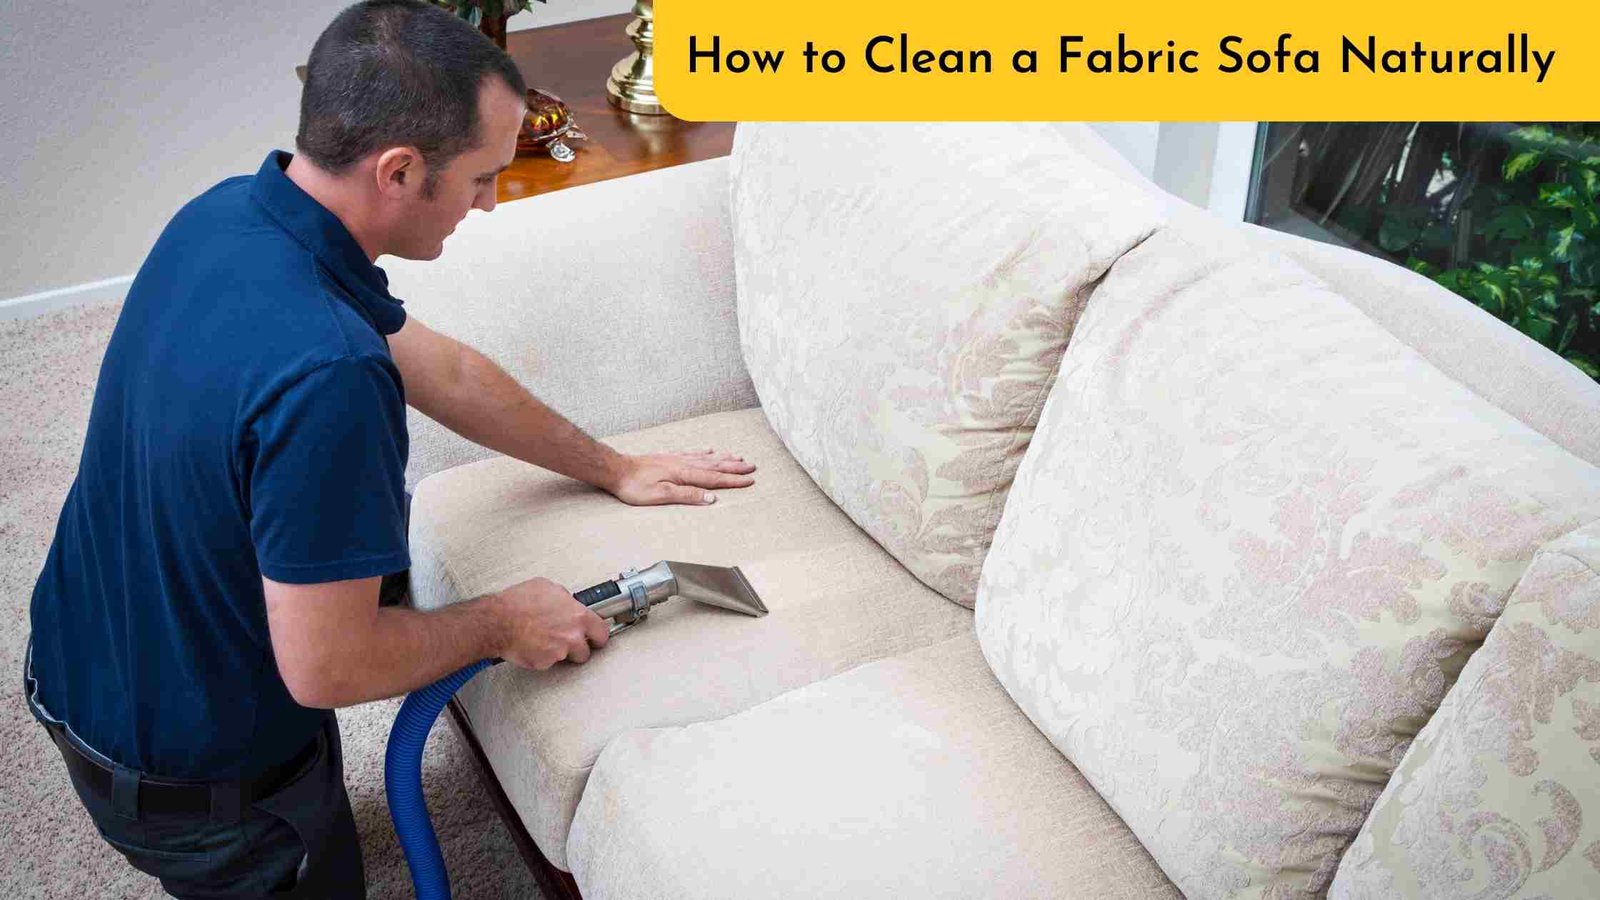 How to Clean a Fabric Sofa Naturally